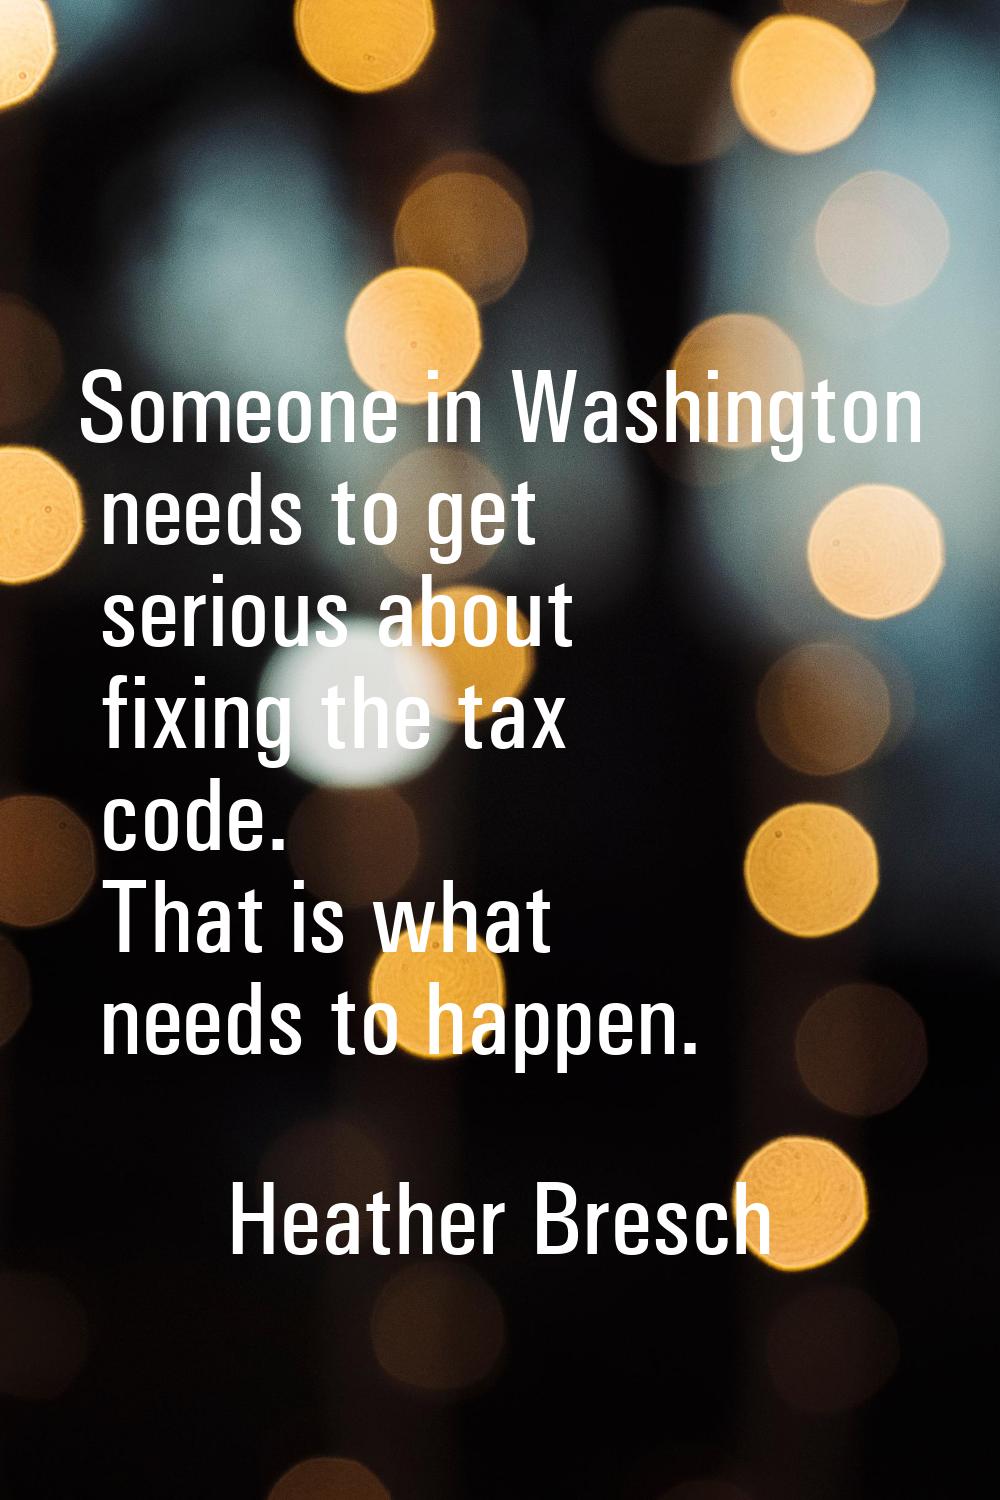 Someone in Washington needs to get serious about fixing the tax code. That is what needs to happen.